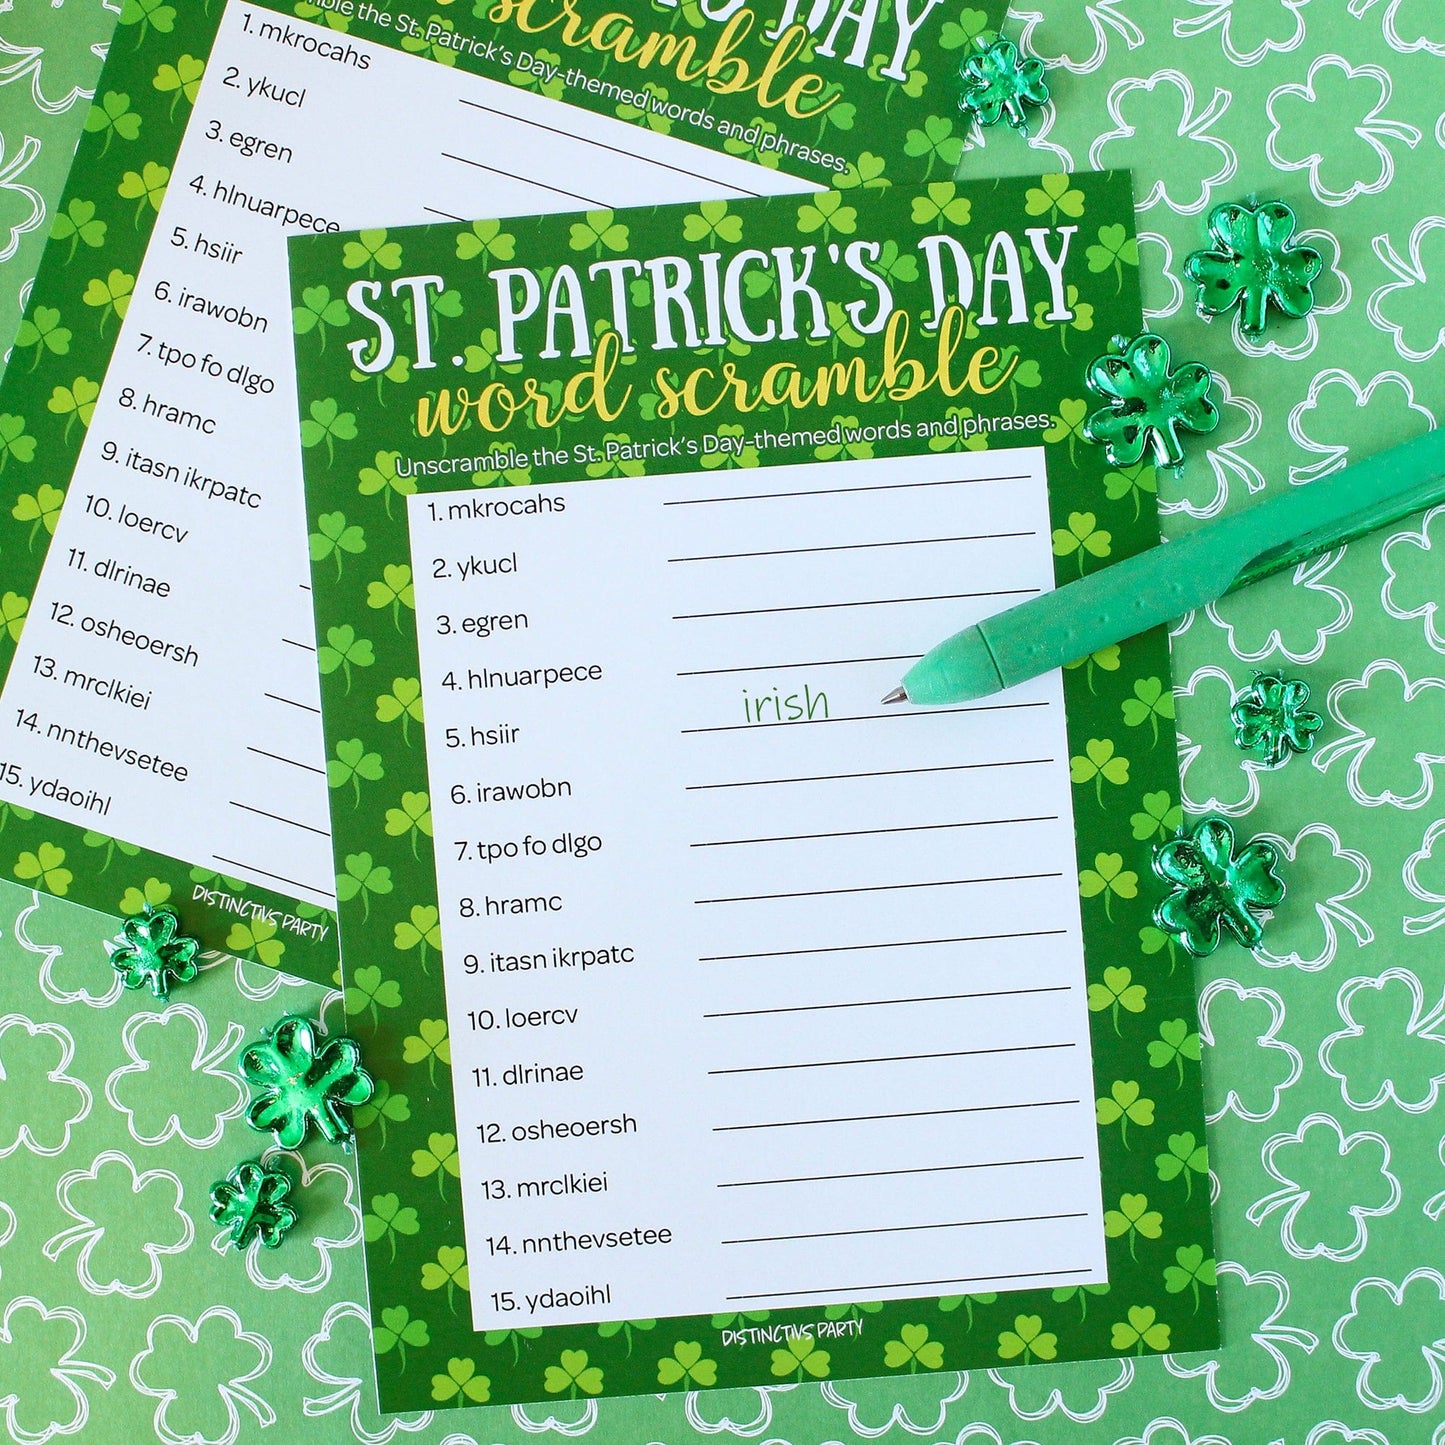 St. Patrick's Day Word Scramble Classroom Party Game - 25 Player Cards